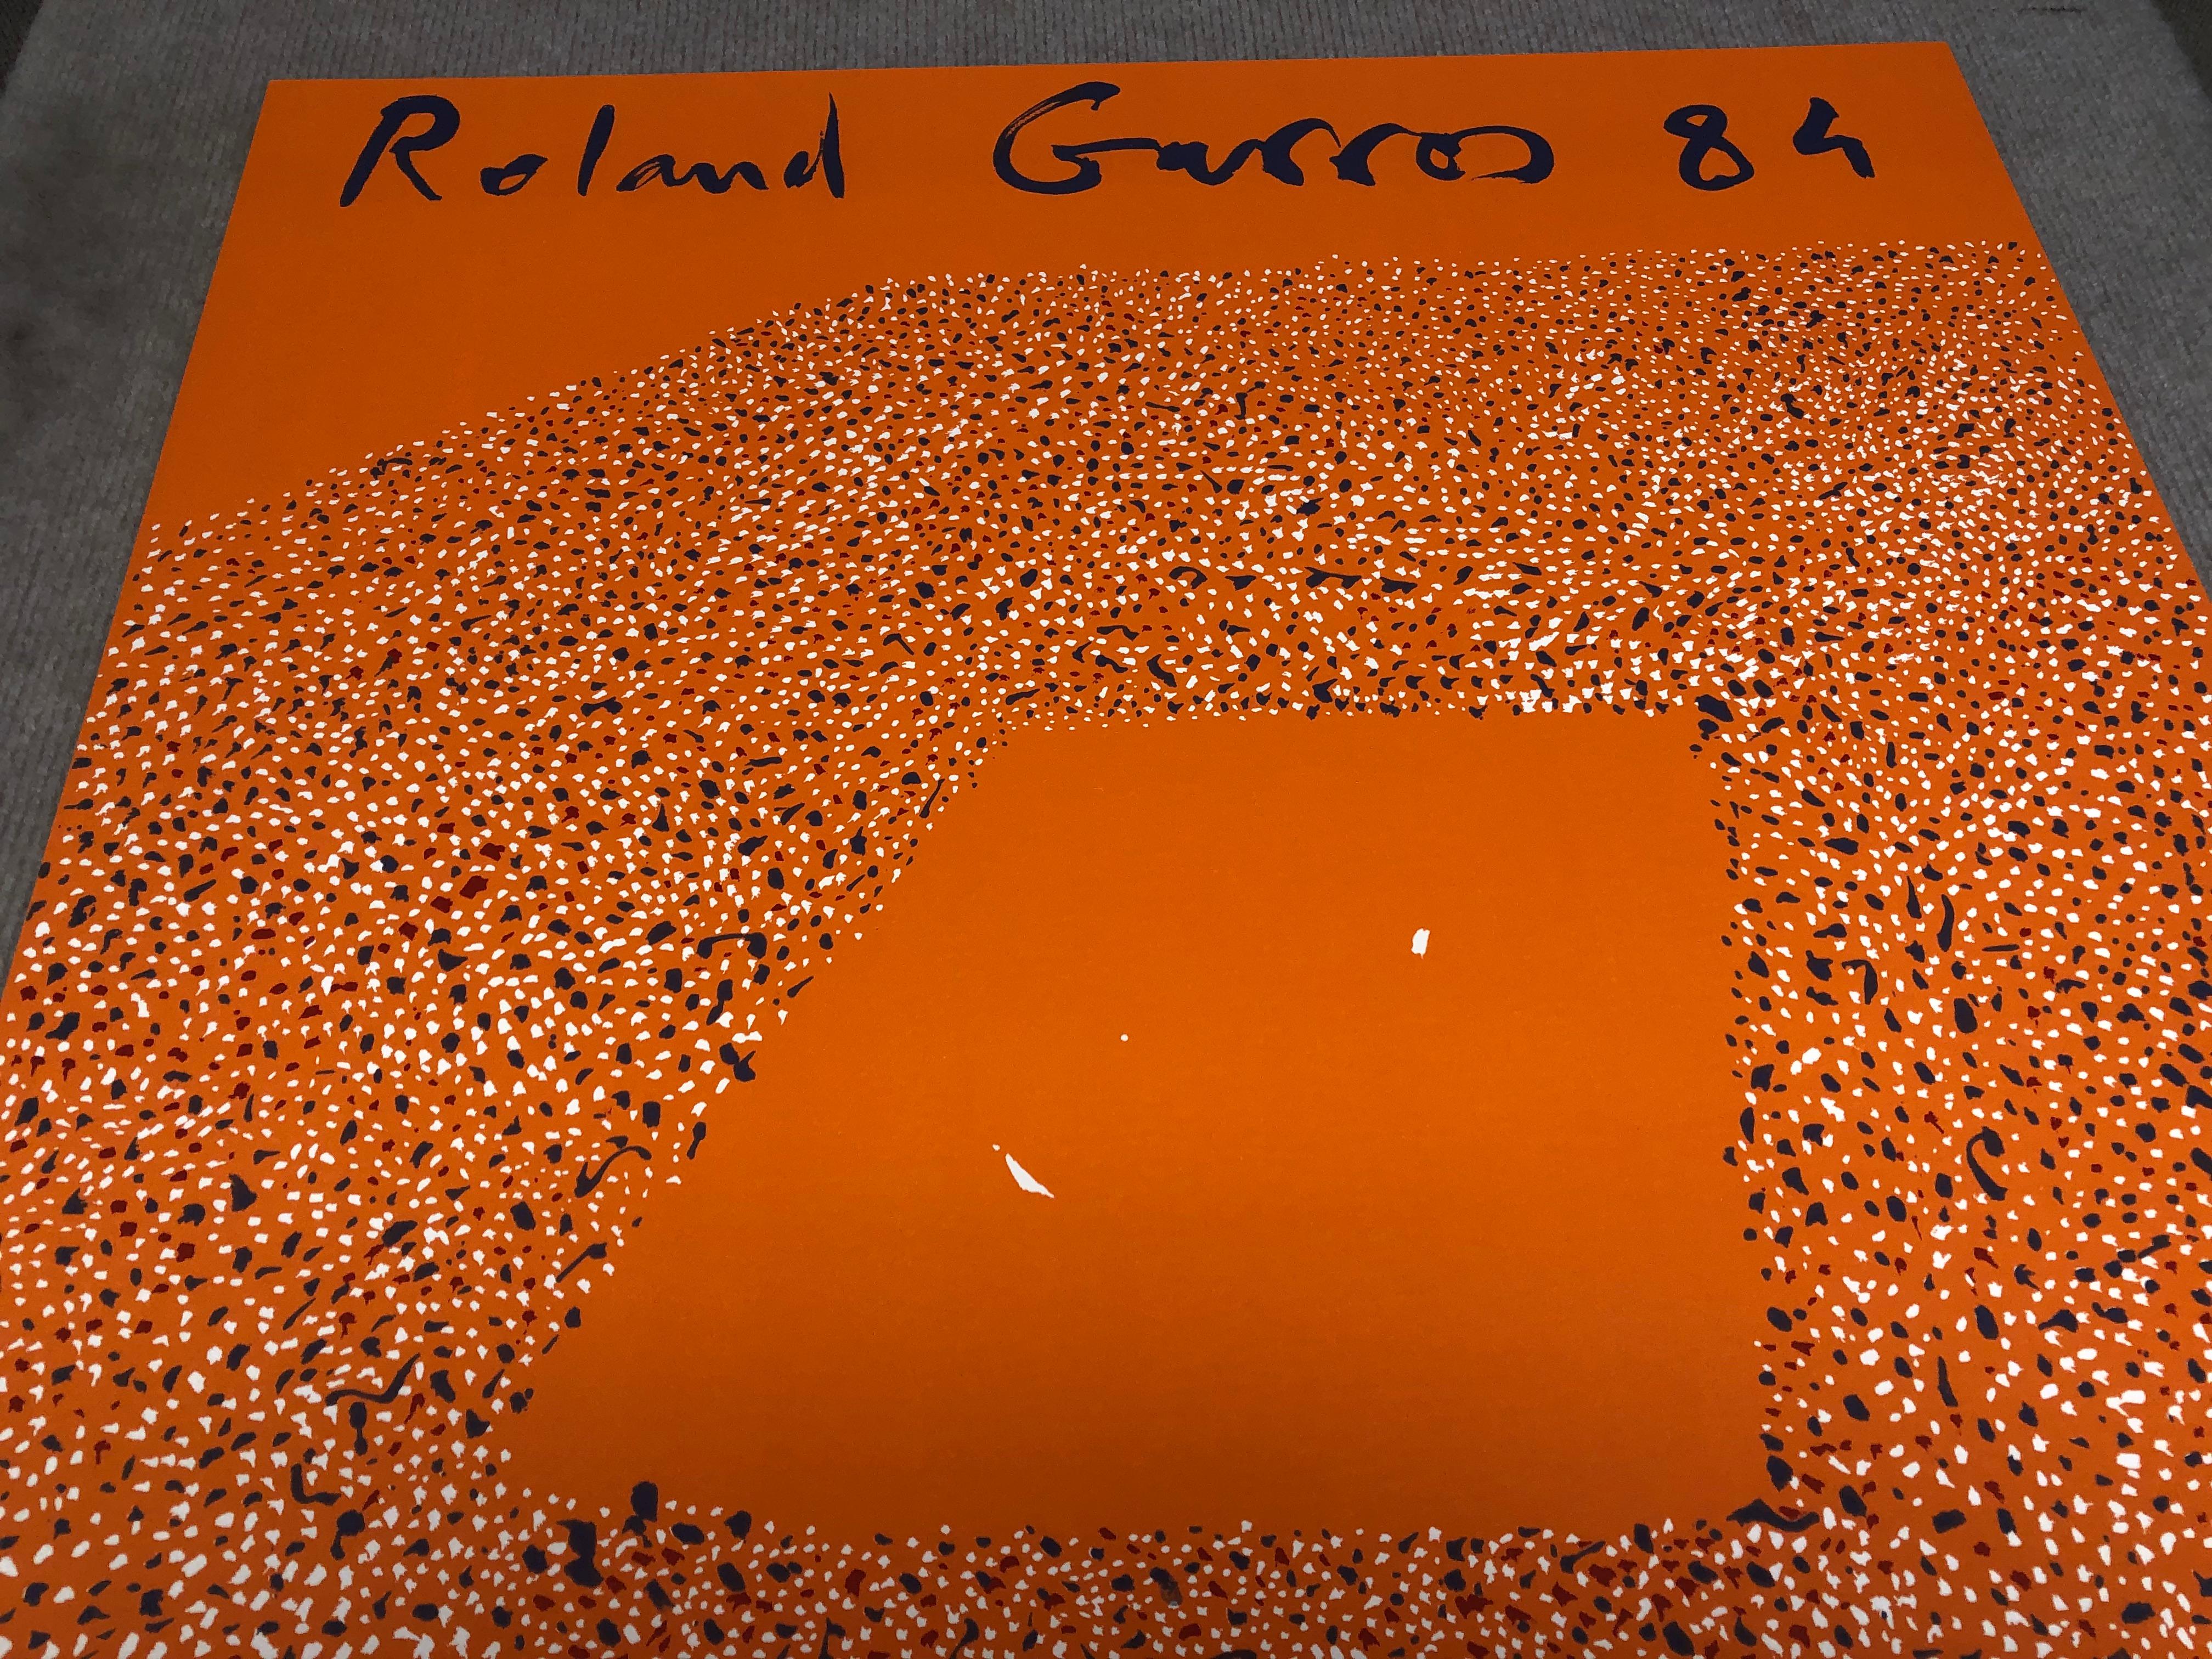 1984 Gilles Aillaud 'Roland Garros French Open' Pop Art Orange France Lithograph 11